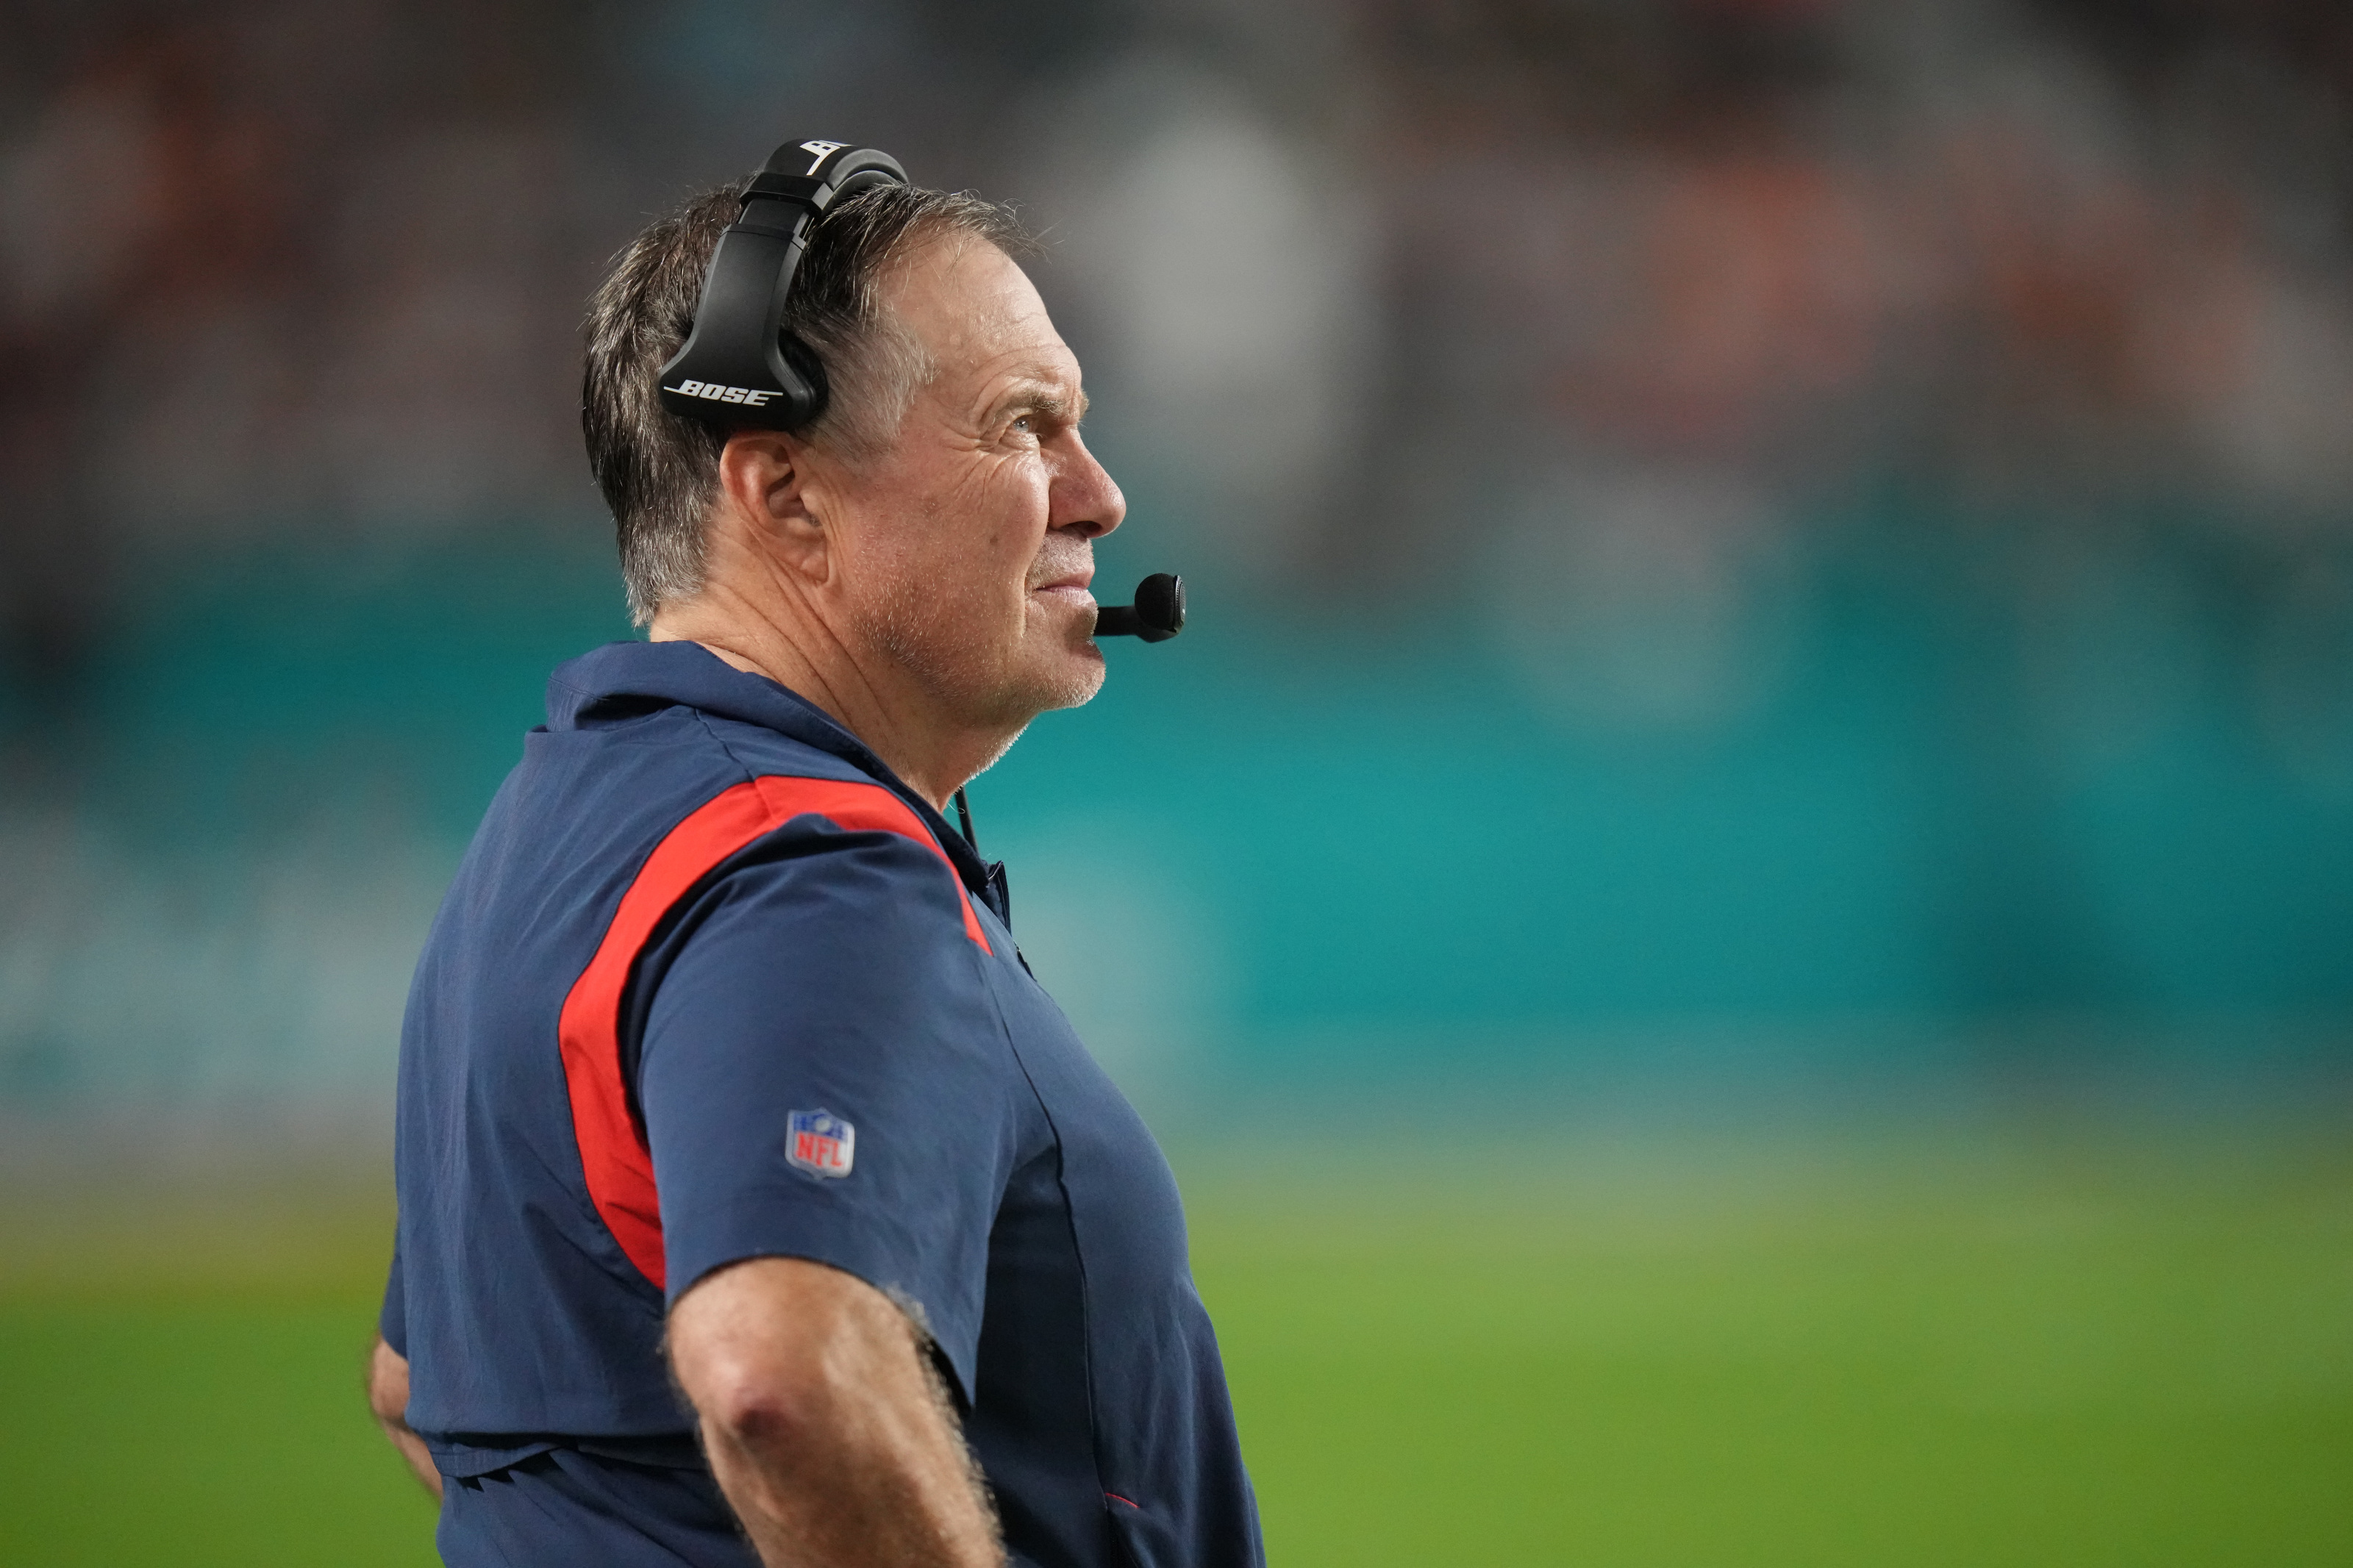 New England Patriots, Bill Belichick playing possum while AFC teams rise